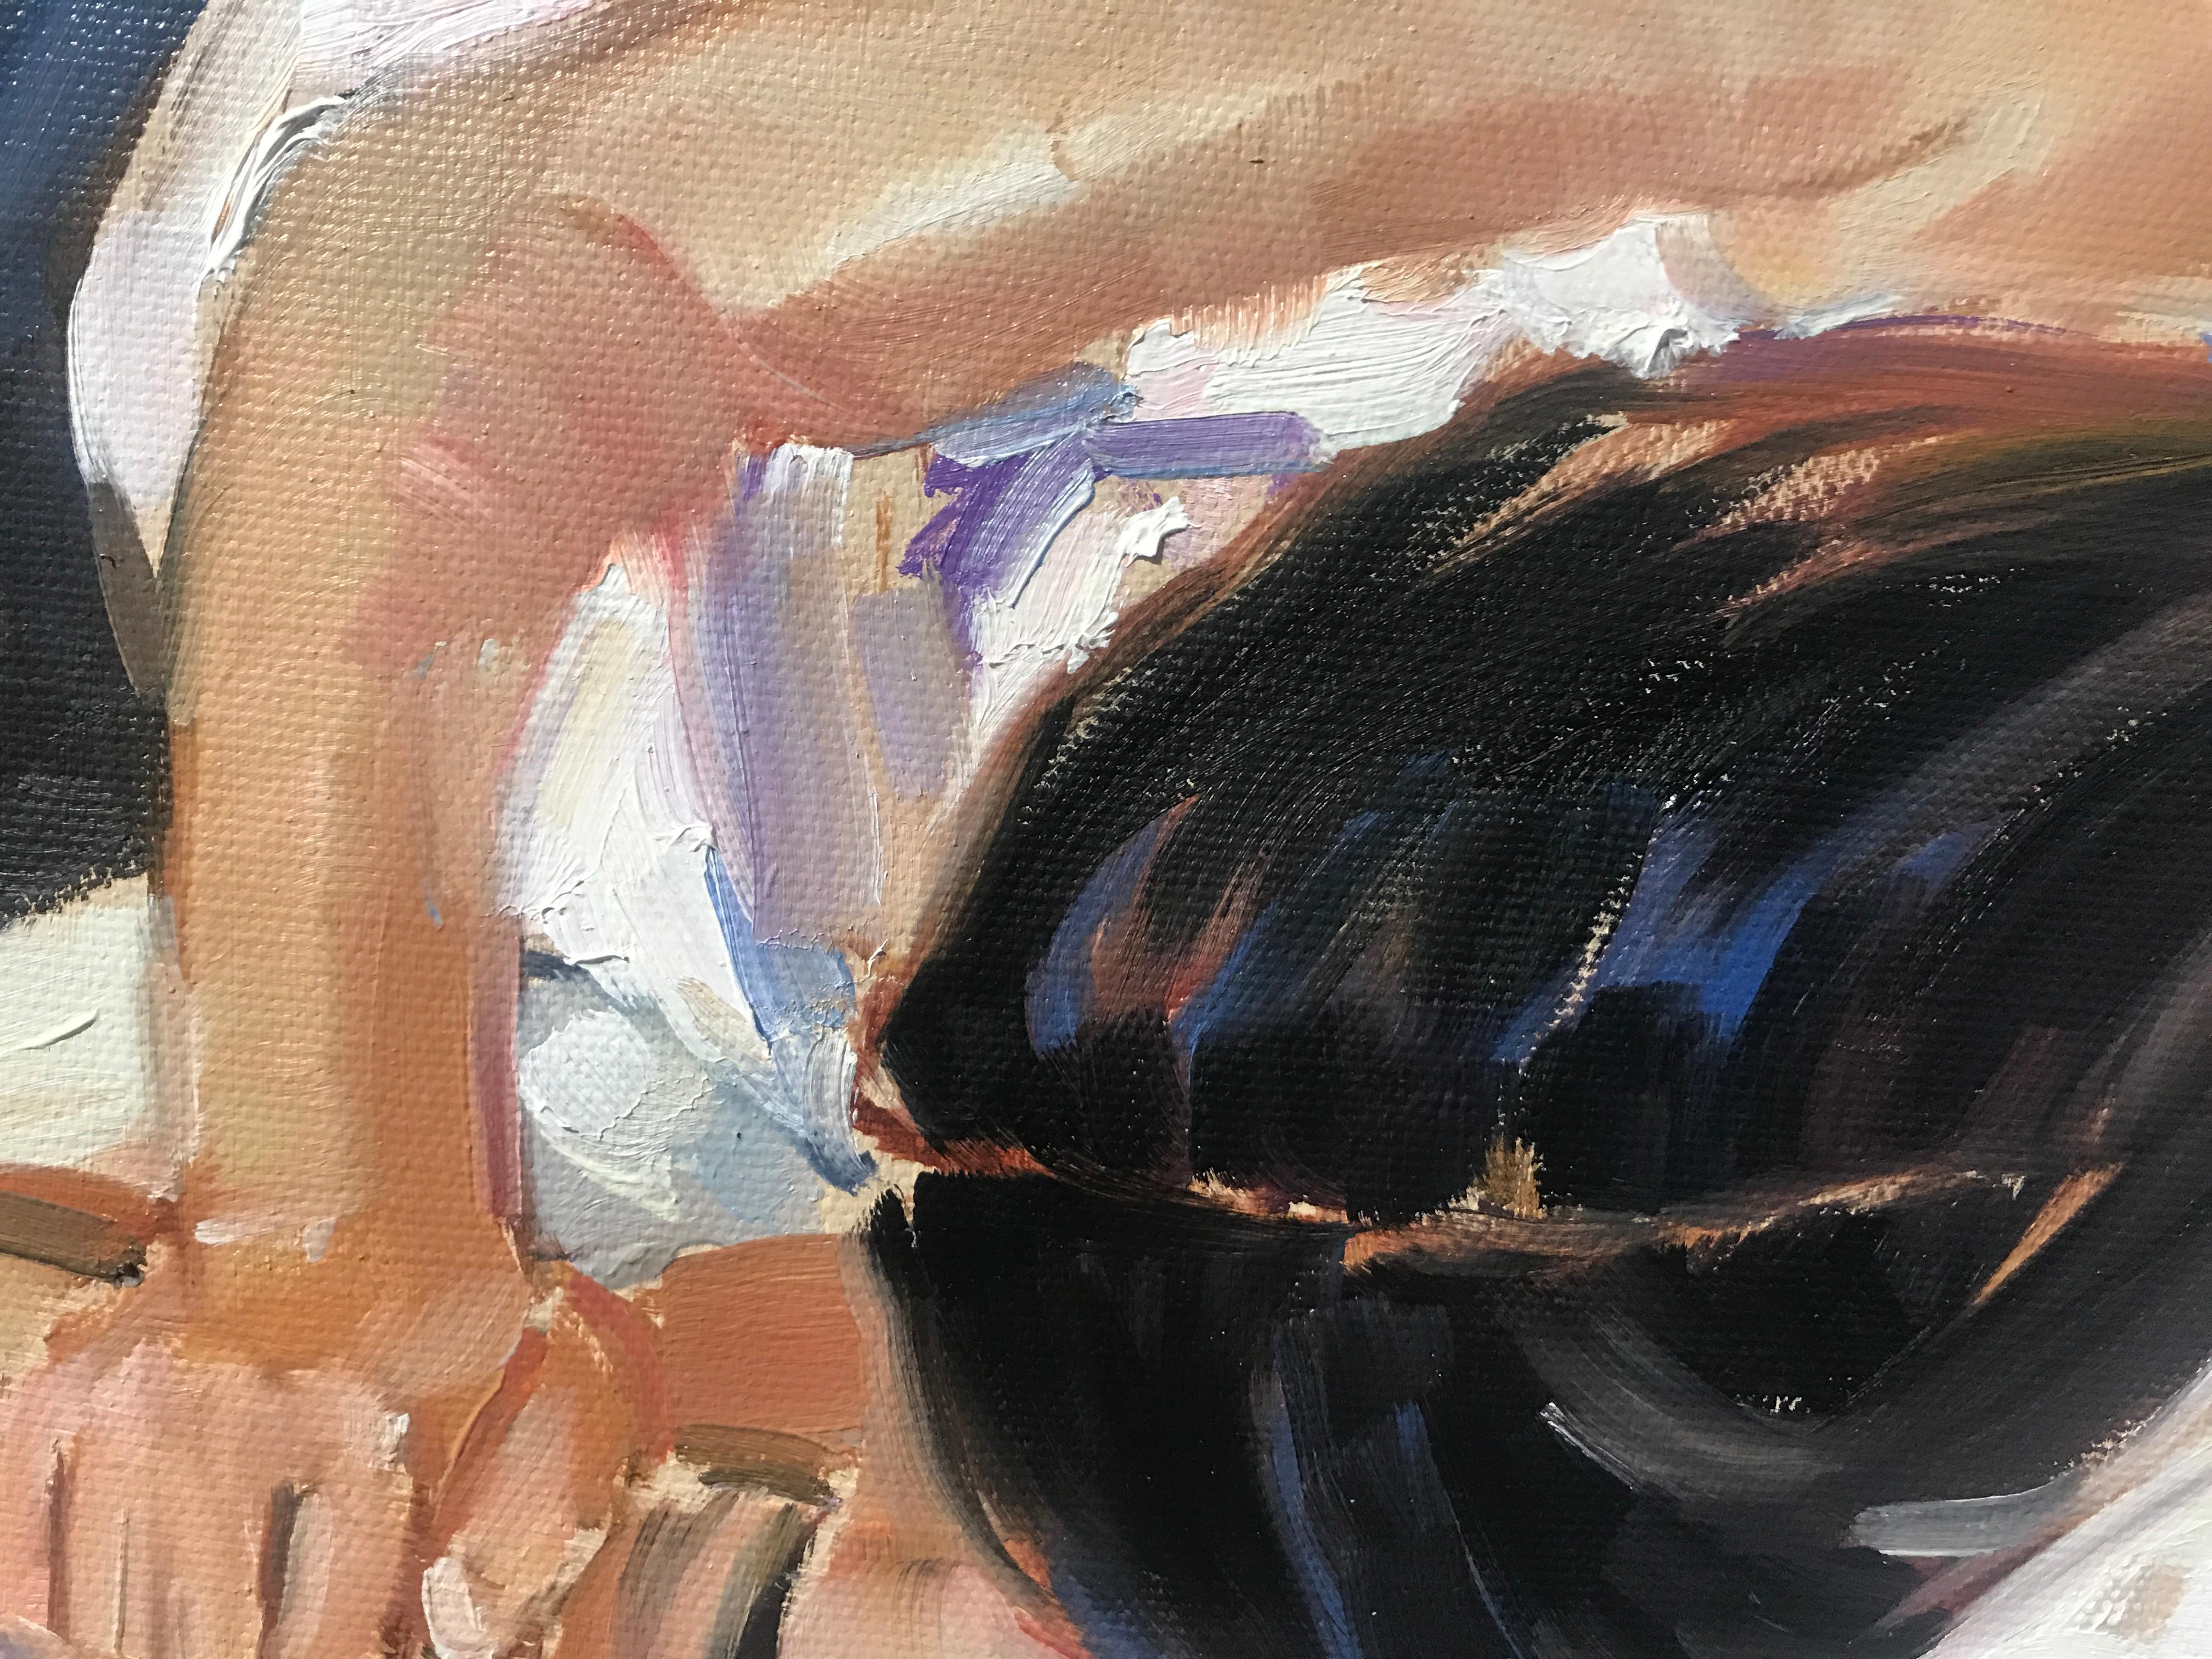 With a nod to Shakespeare, we can readily count the ways we love Laura Shubert’s light-and energy-filled paintings. We admire her deft way of capturing luminosity as it plays off her subjects. We smile at her choice of subject: waiters, caught